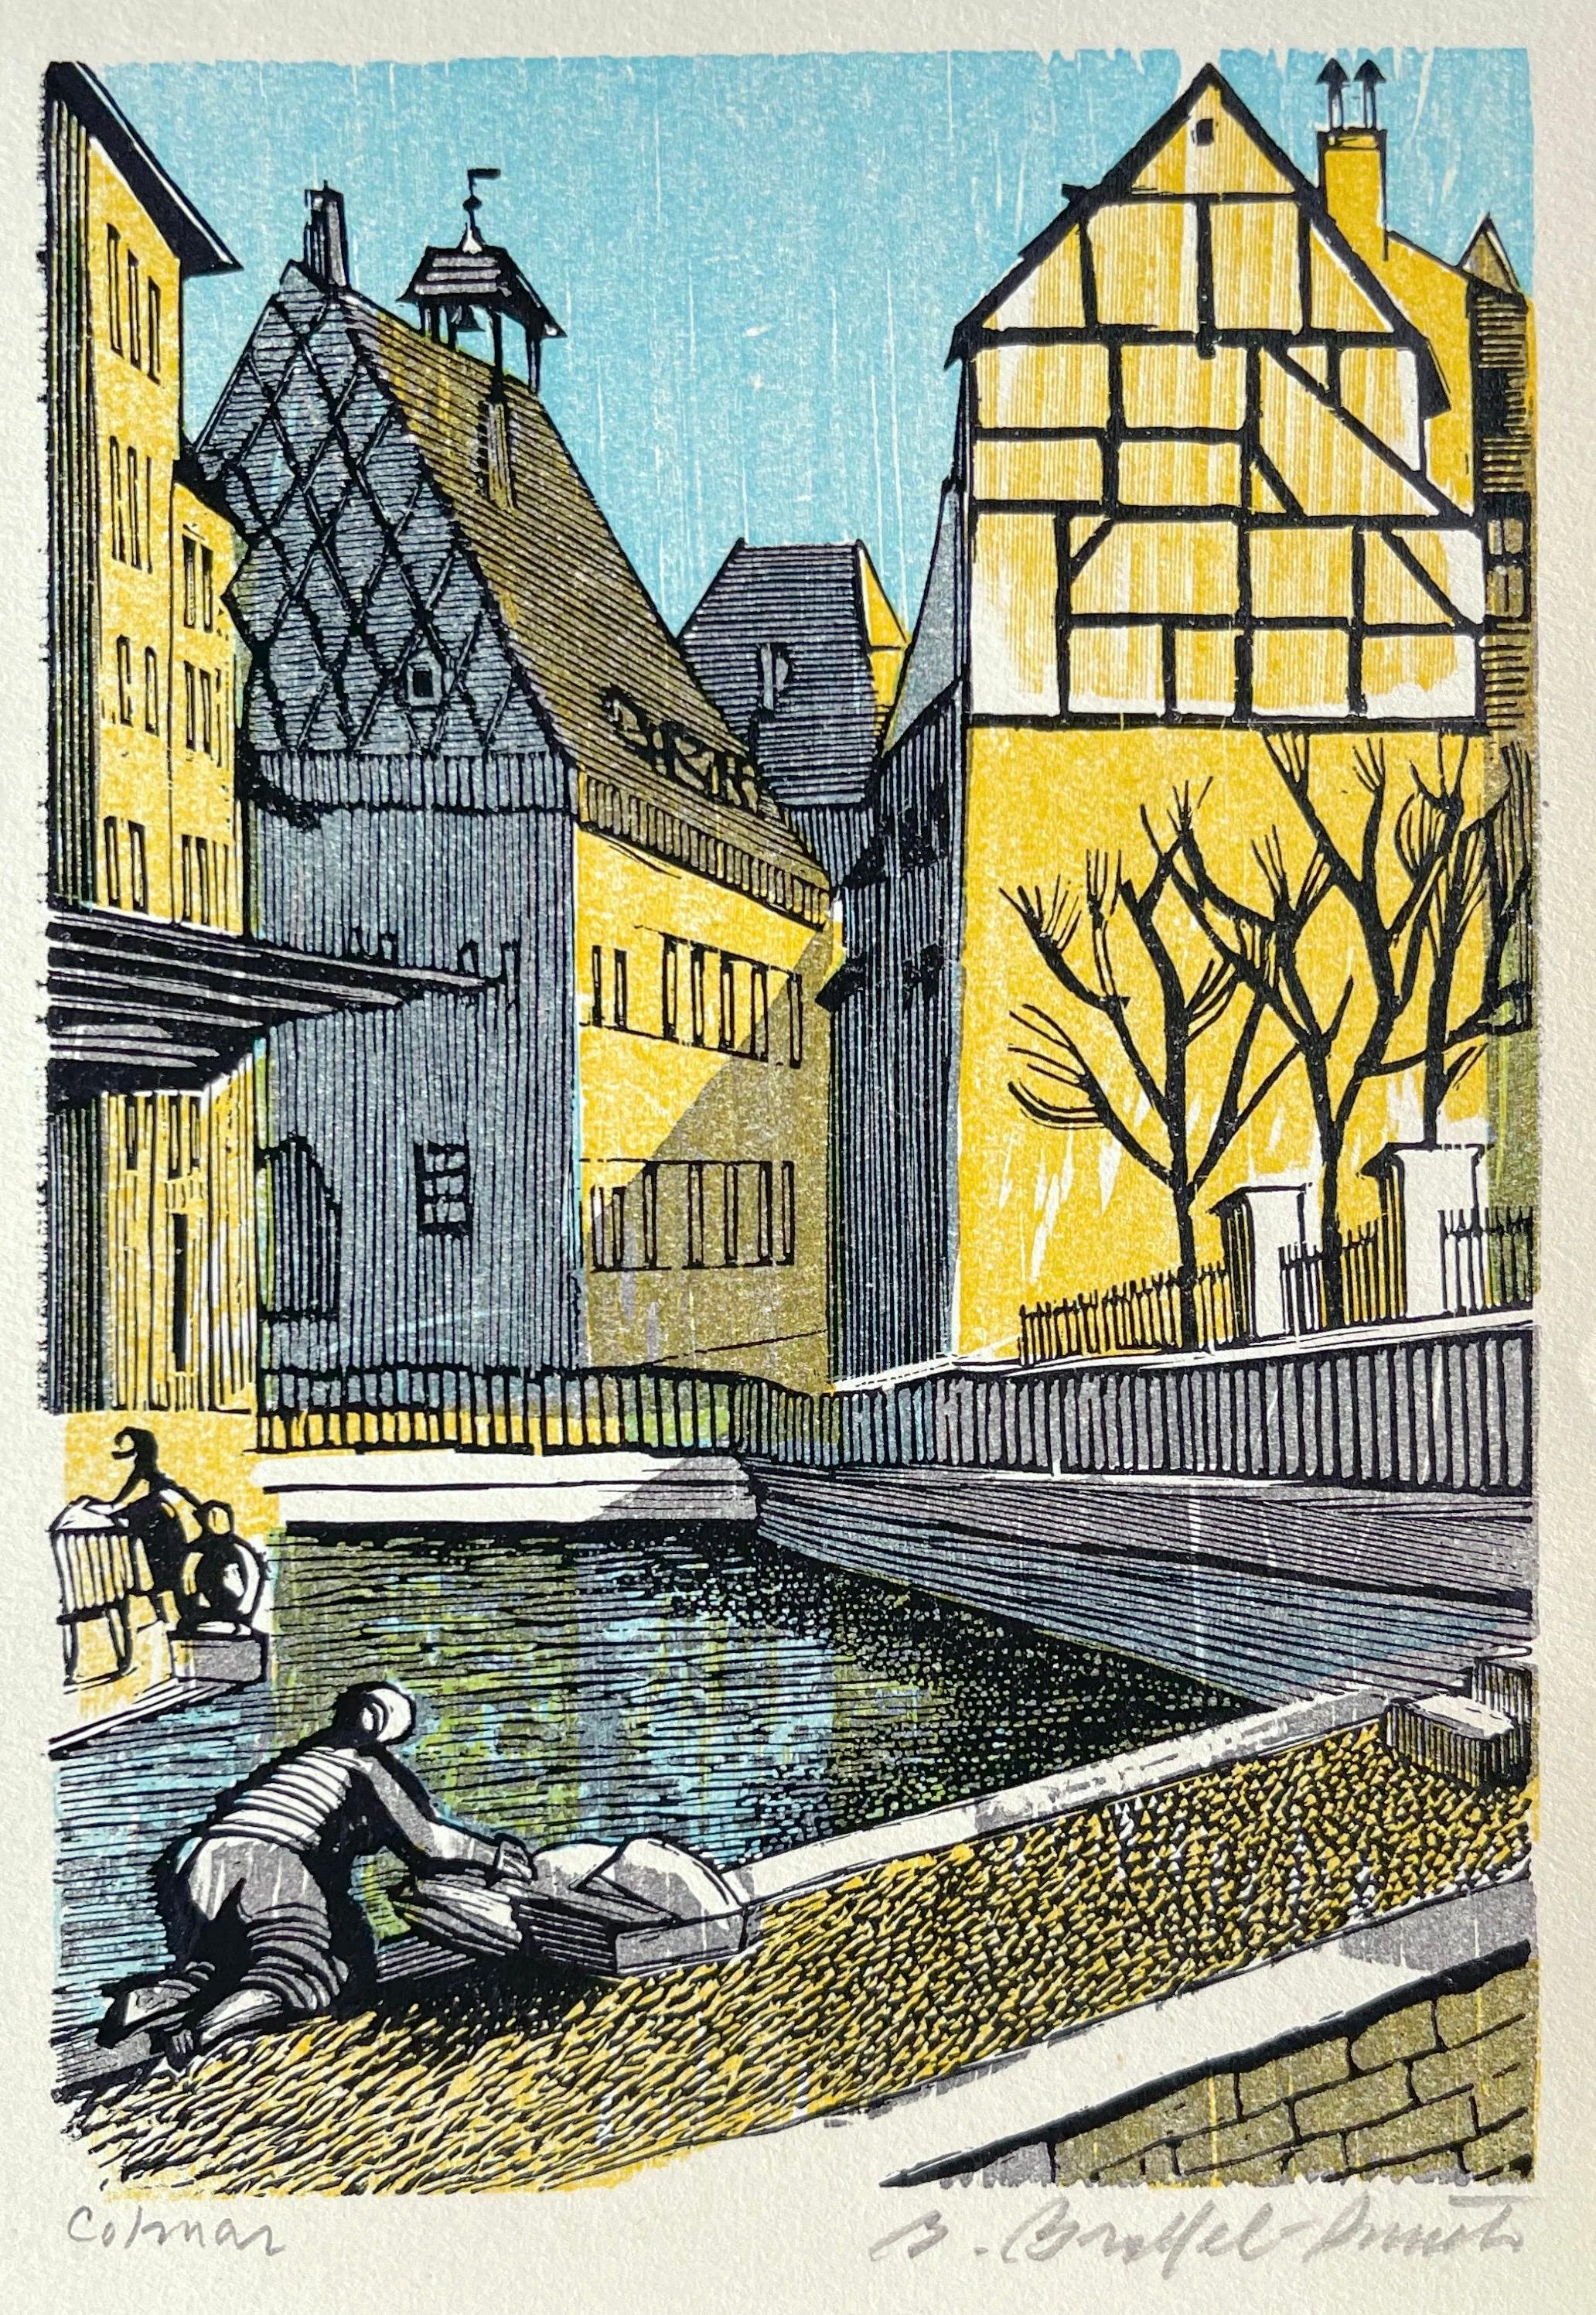 Bernard Brussel-Smith Figurative Print - COLMAR Signed Wood Engraving, French Village, Little Venice Half-Timbered Houses